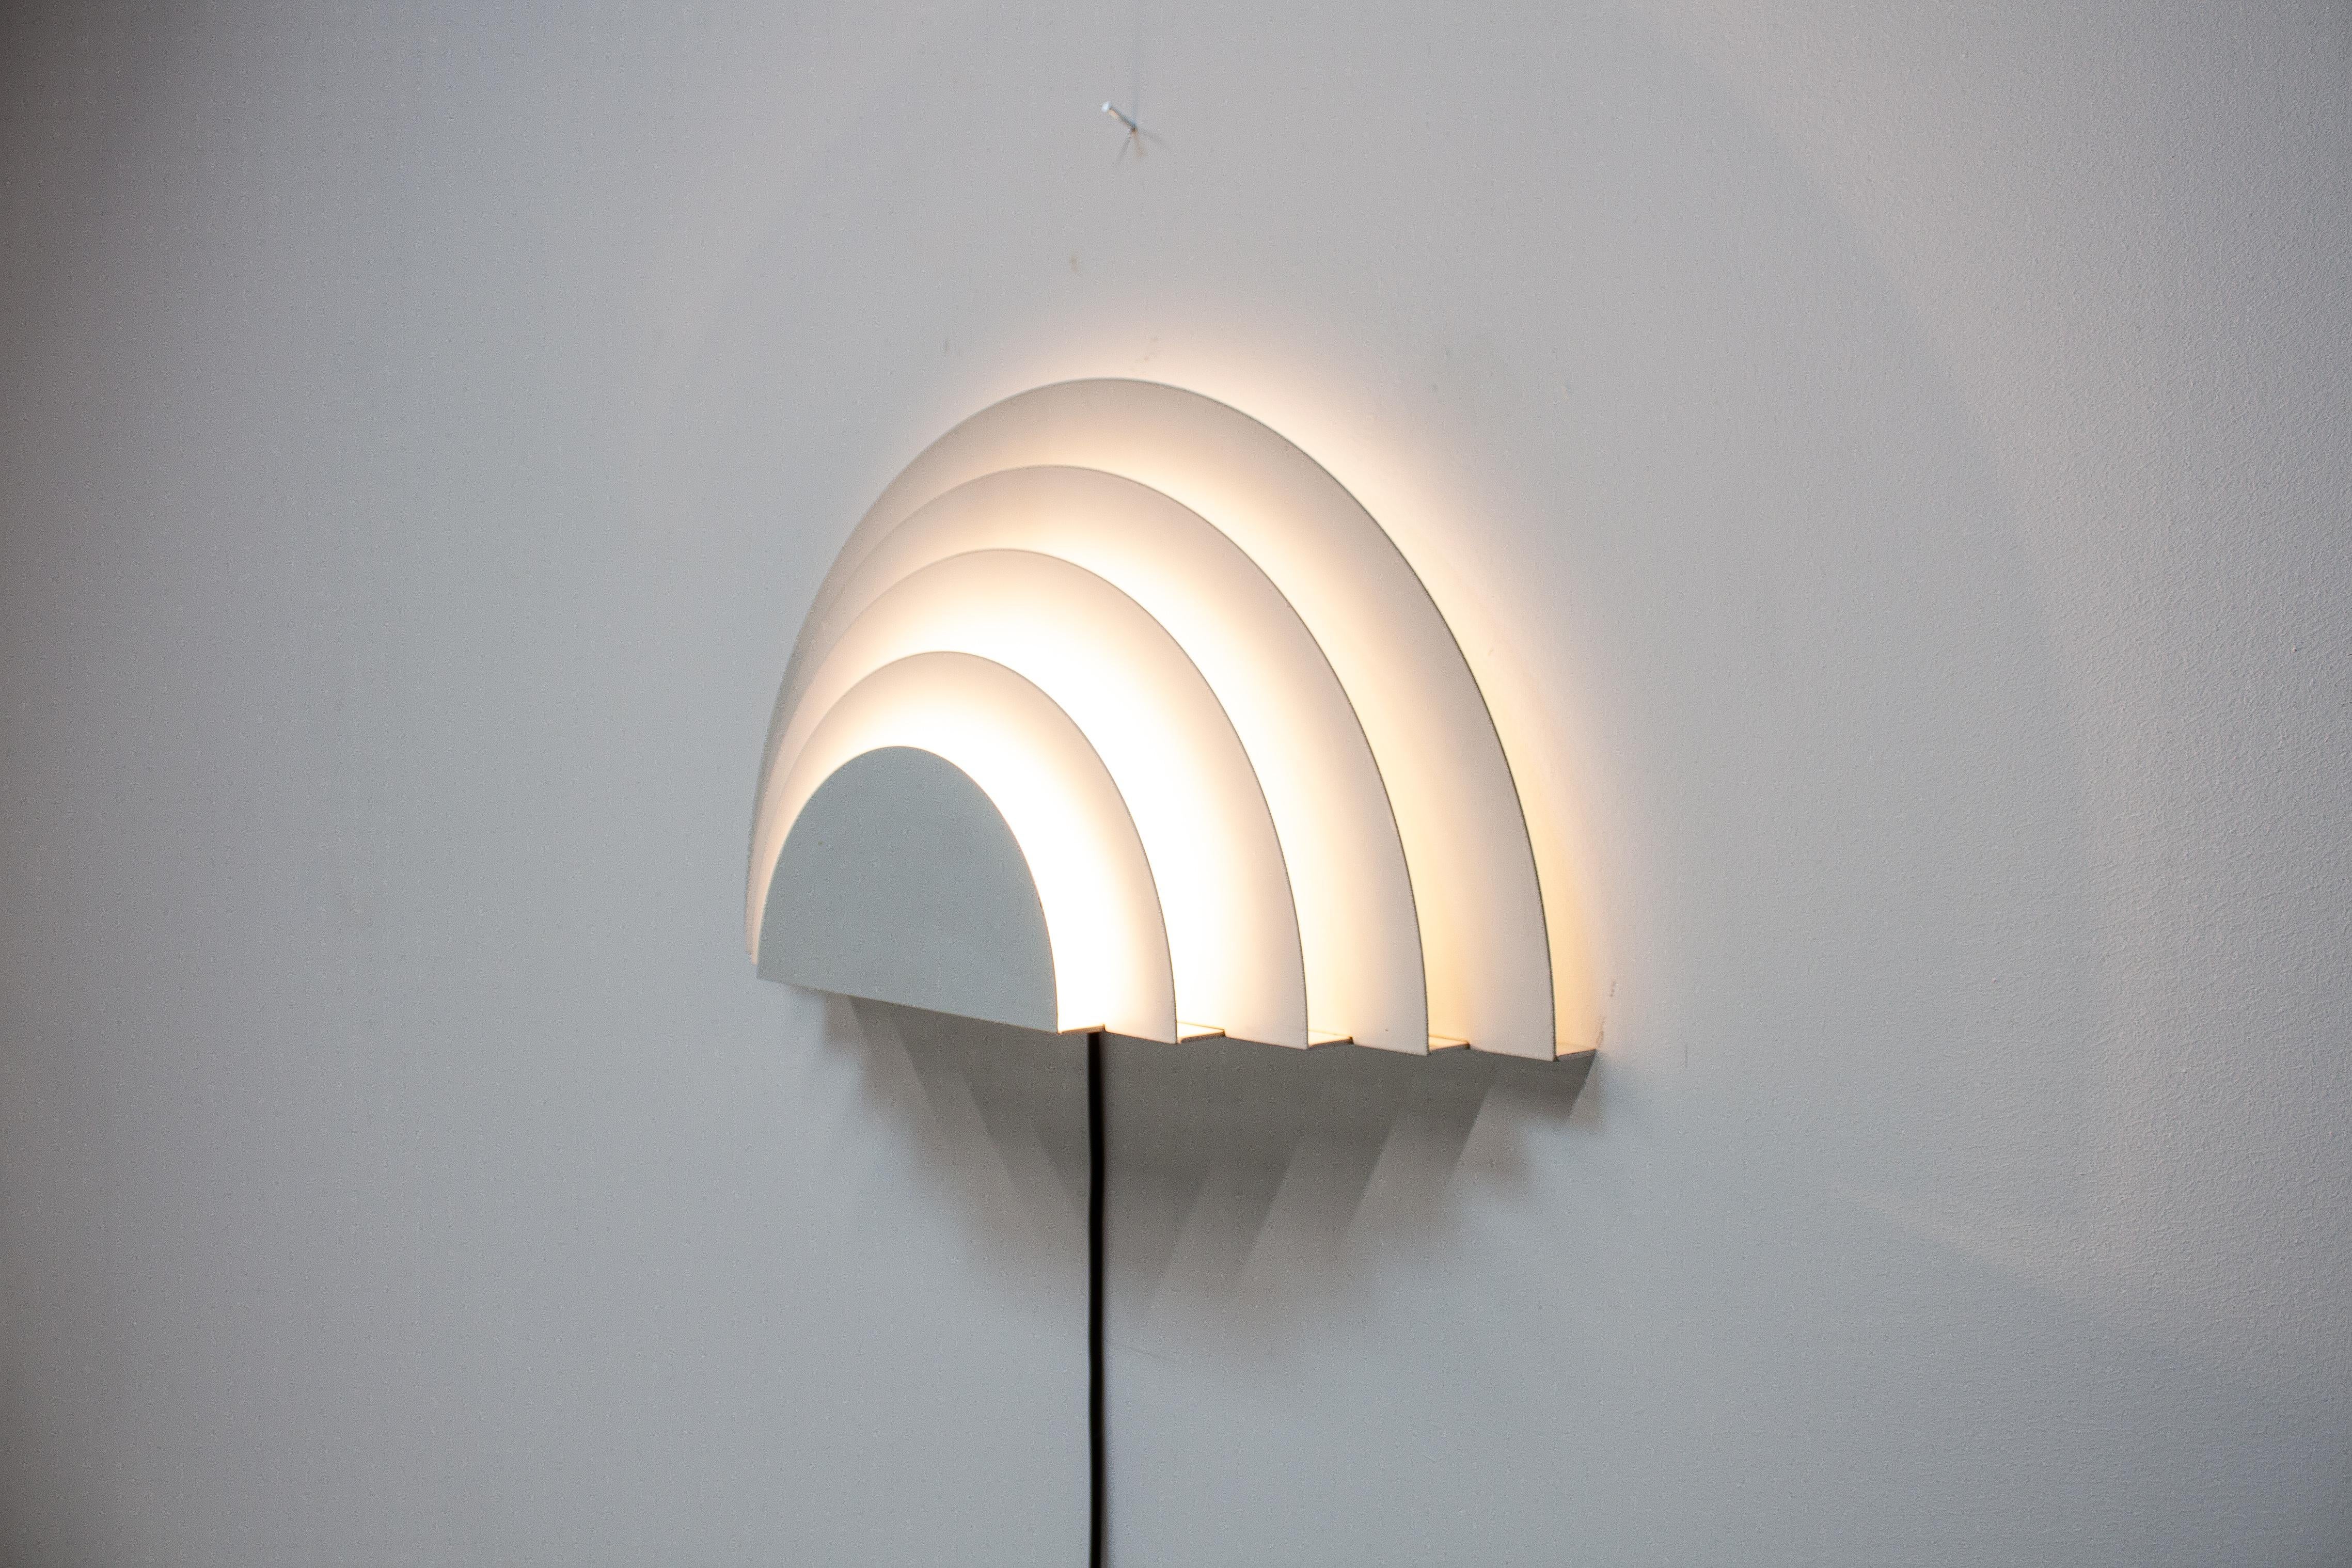 Meander Wall Sconce by Cesare Casati and Emanuele Ponzio for RAAK, Netherlands 1